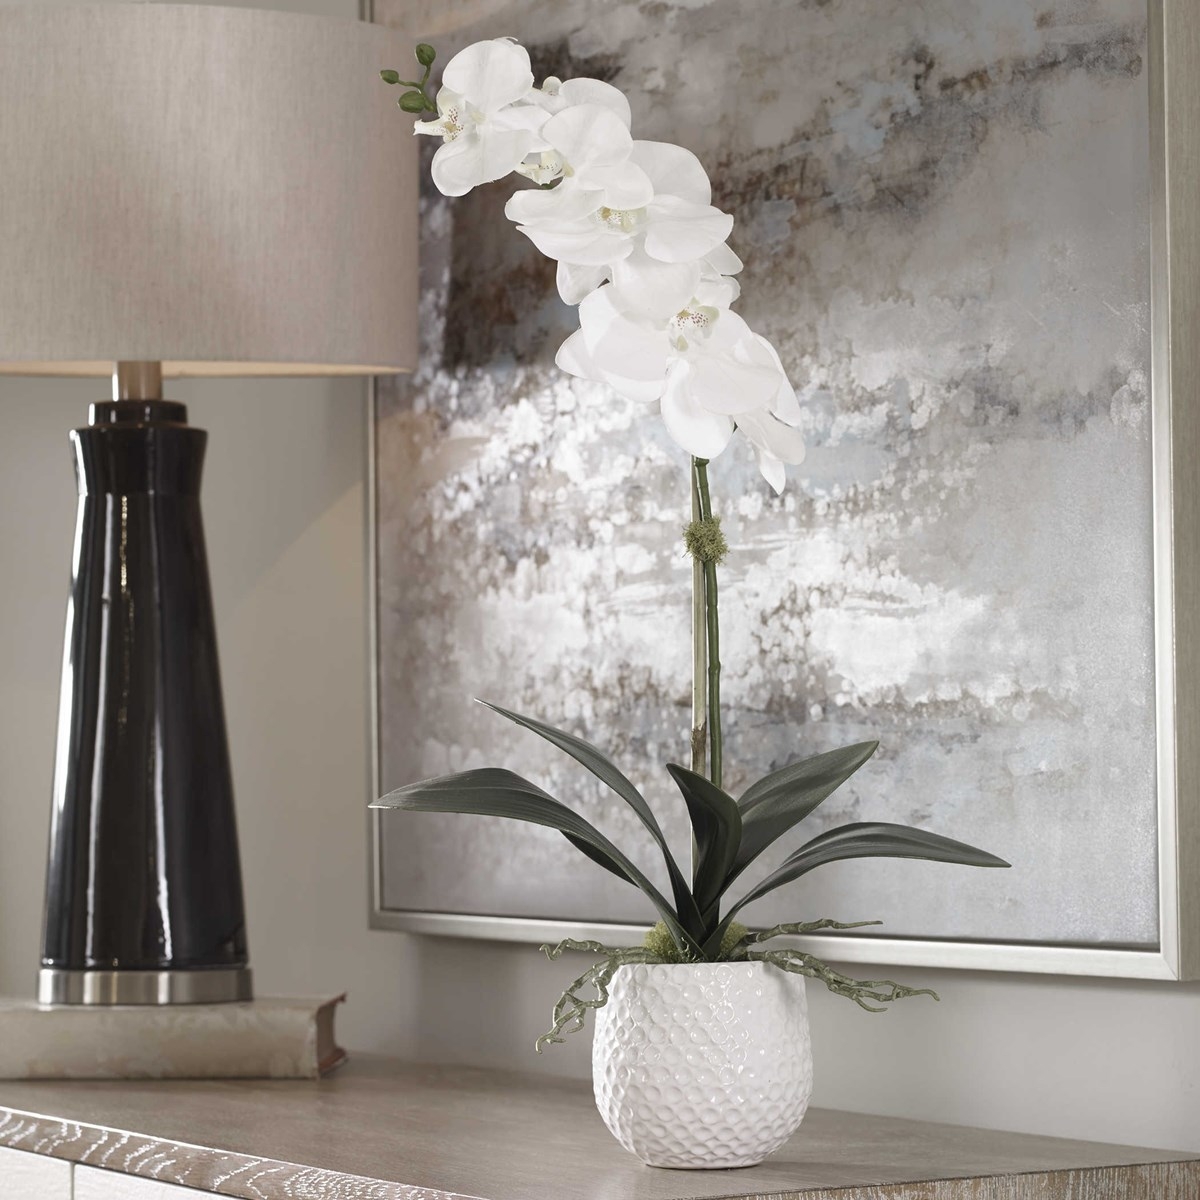 Cami White Orchid - Image 1